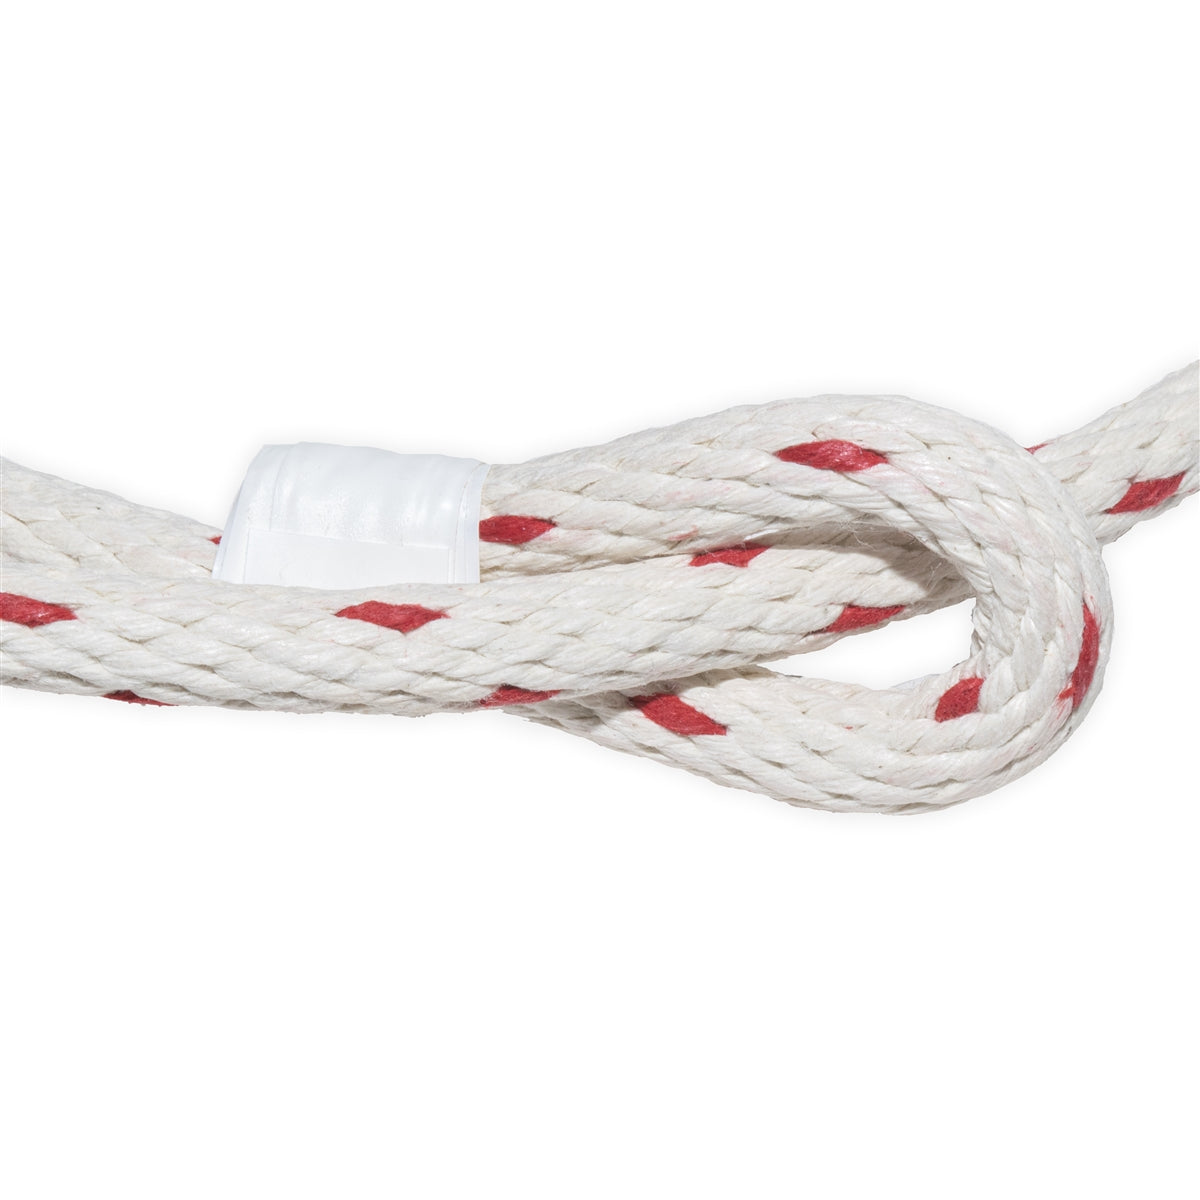 Cotton Trick Rope - 15 Foot